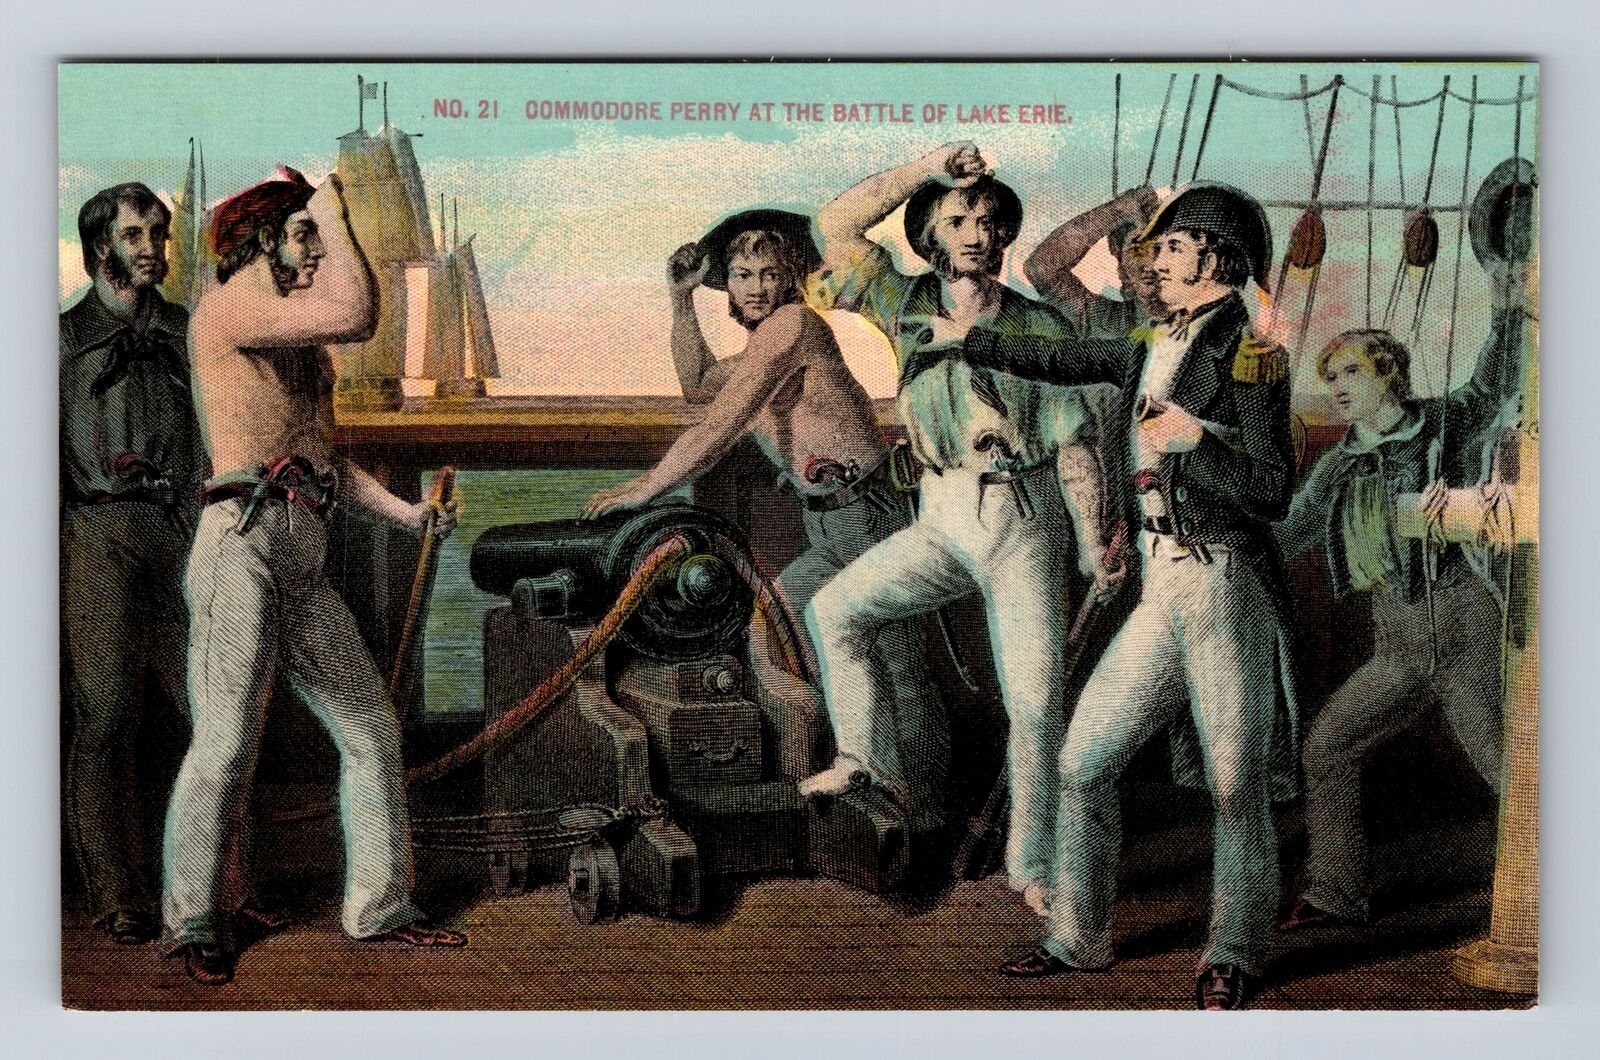 Commodore Perry at the Battle of Lake Erie, Vintage PC Souvenir History Postcard